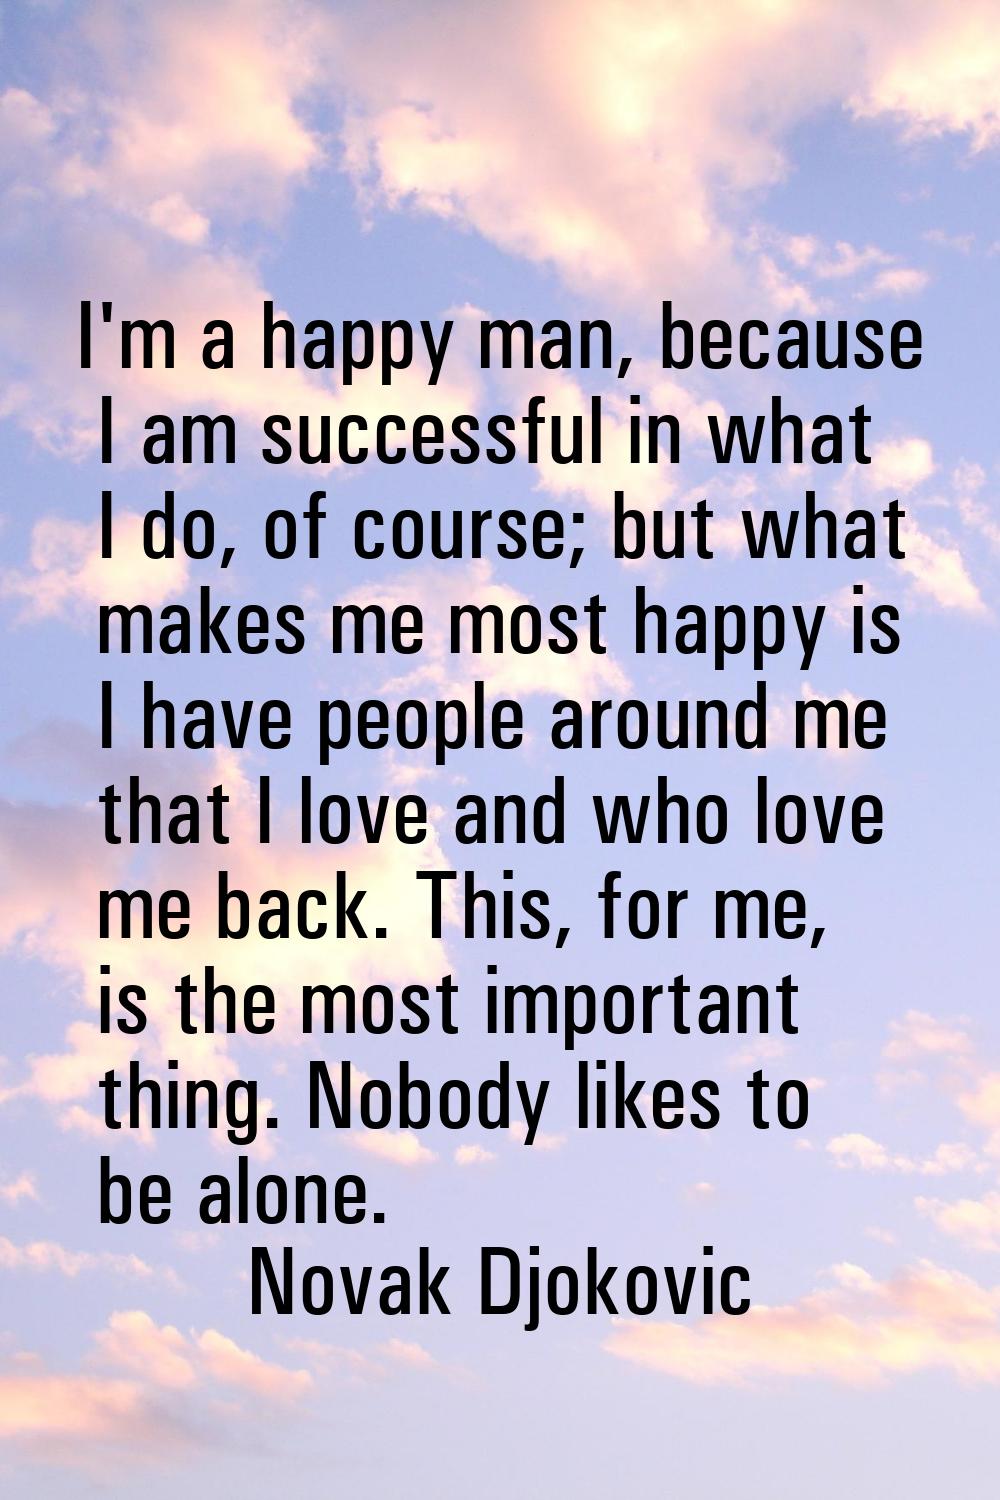 I'm a happy man, because I am successful in what I do, of course; but what makes me most happy is I